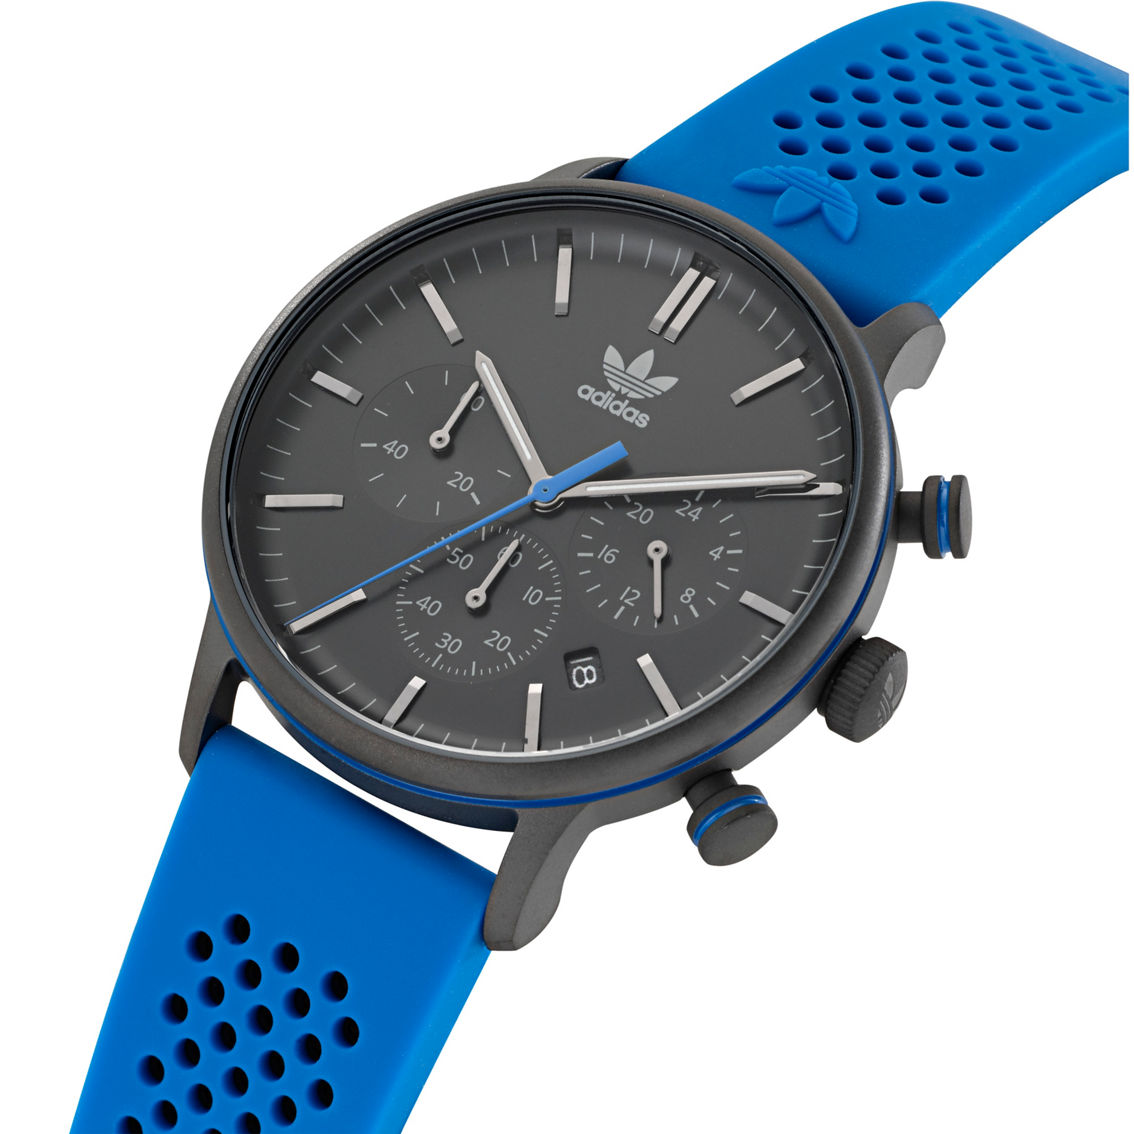 Adidas Men's / Women's Code One Chronograph 40mm Watch - Image 4 of 4